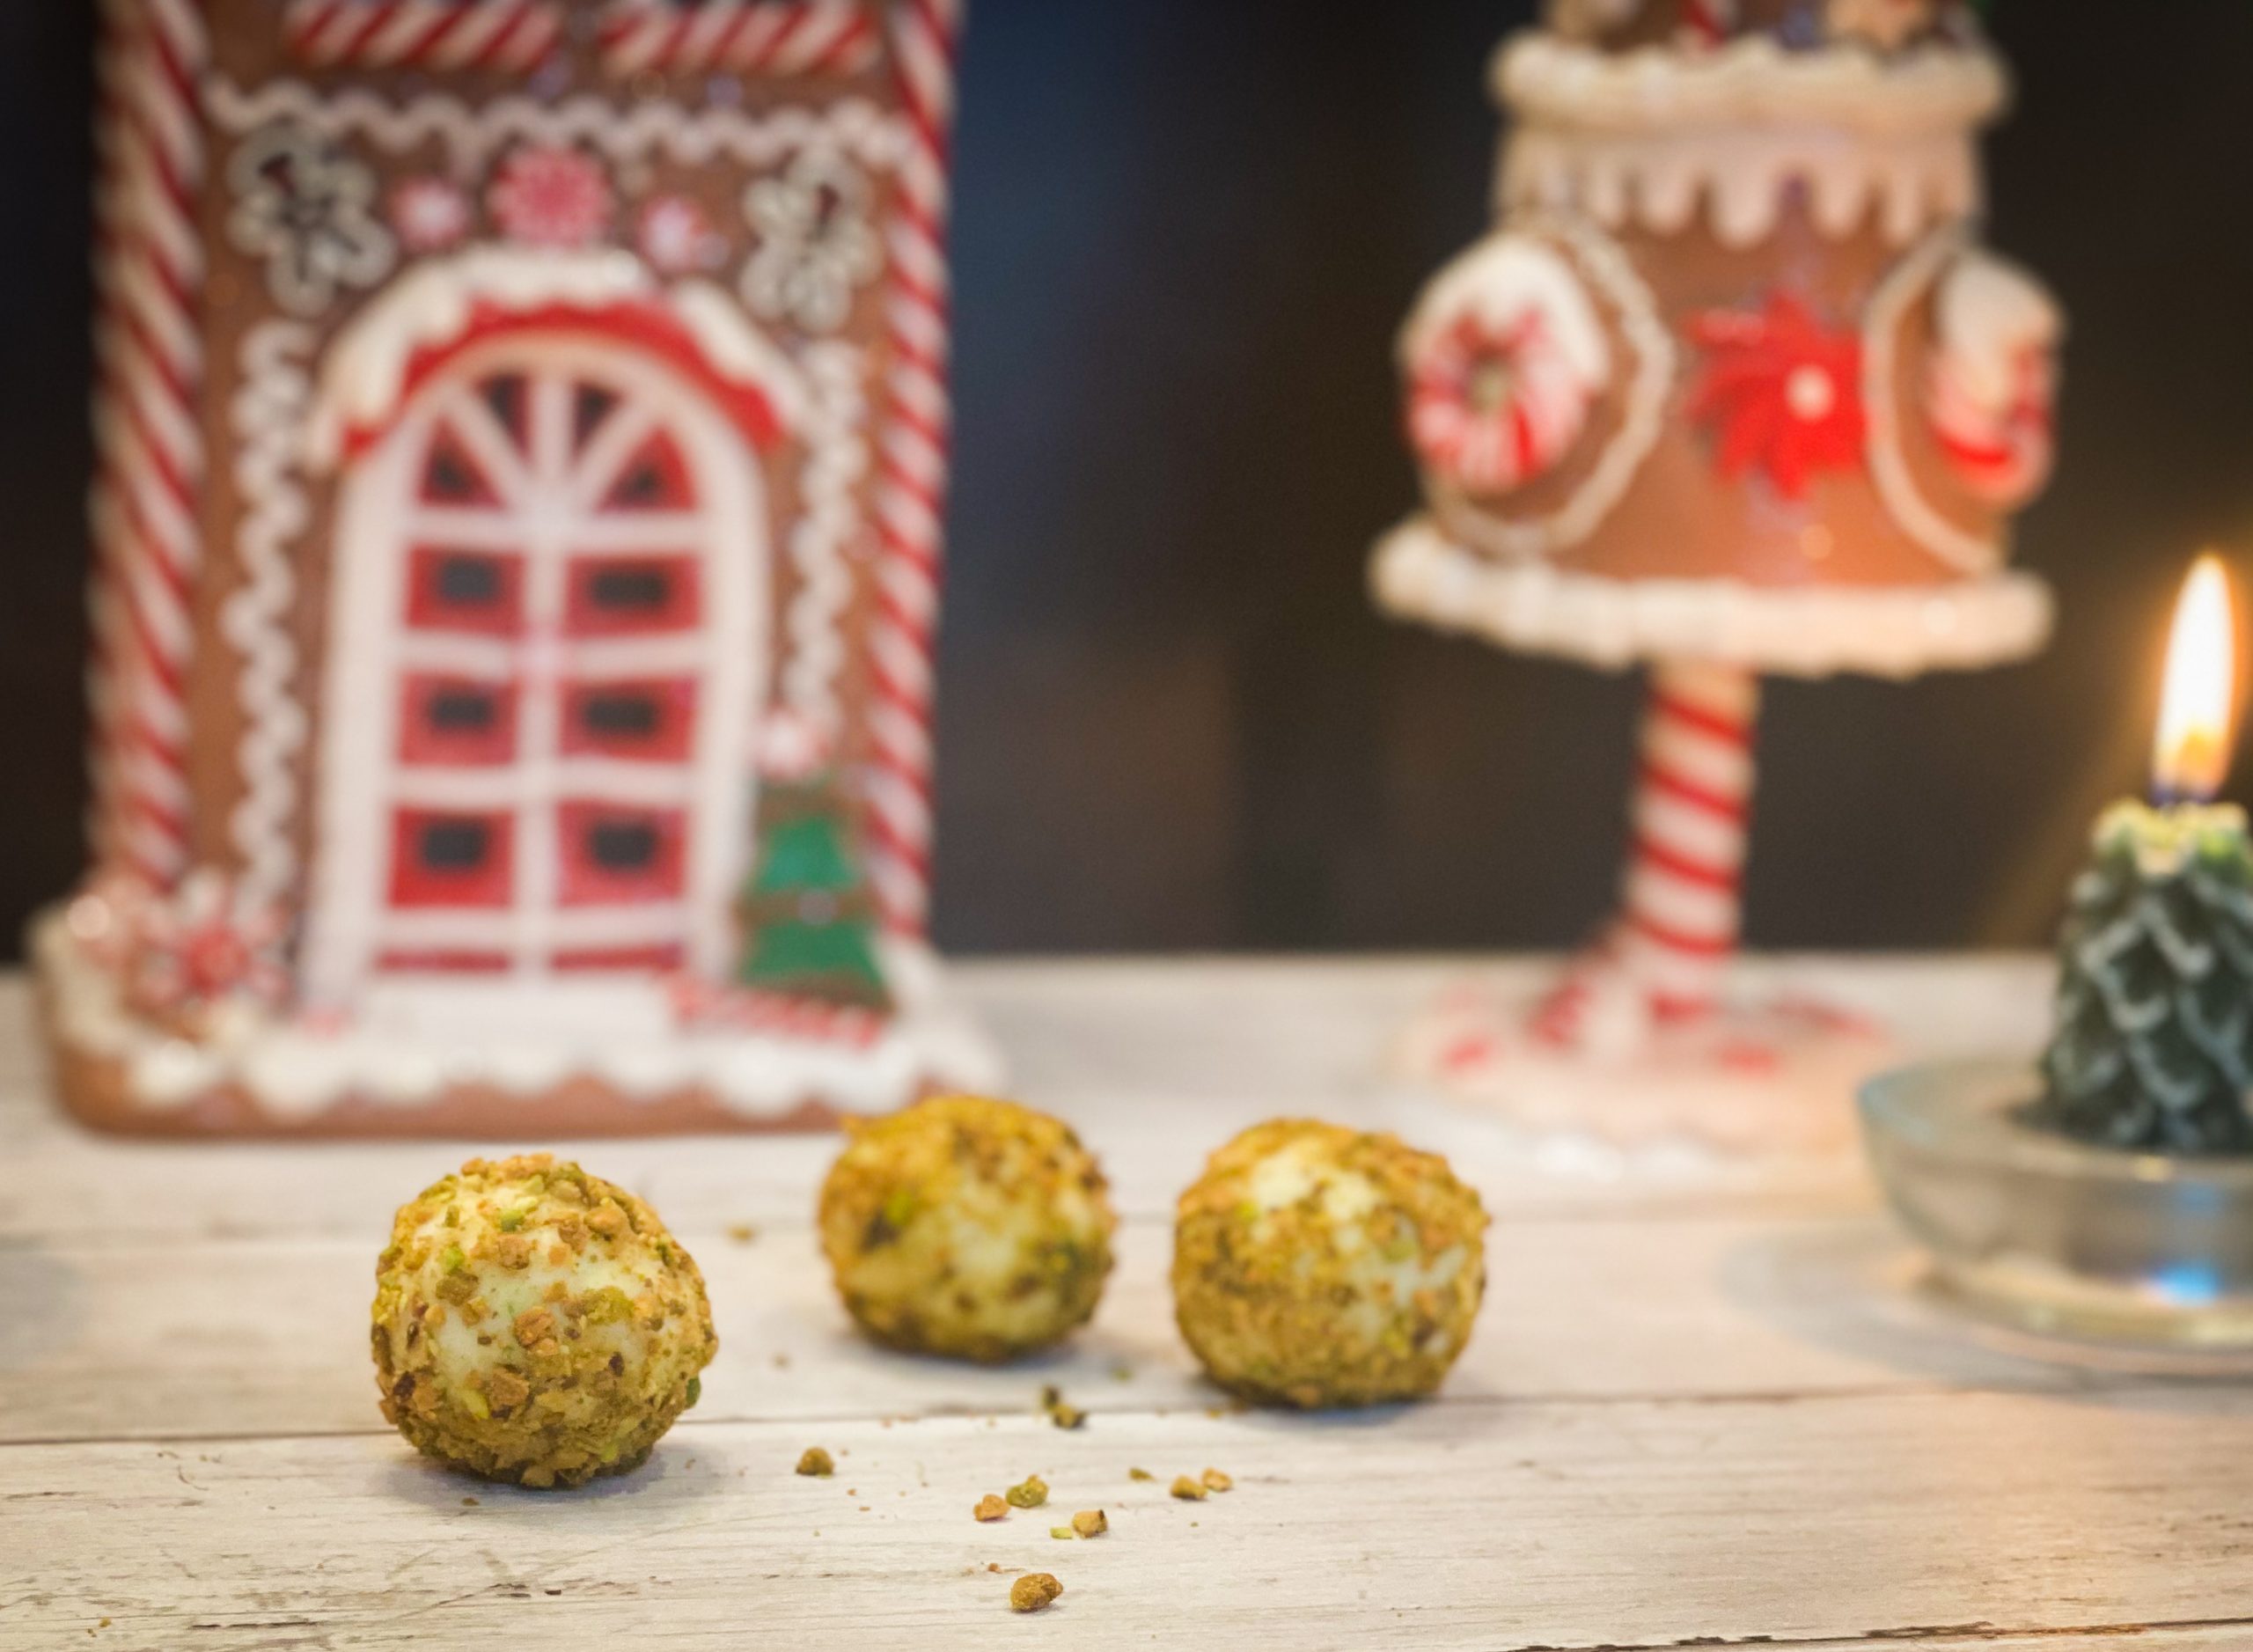 white chocolate lime truffles with pistachios as holiday treats